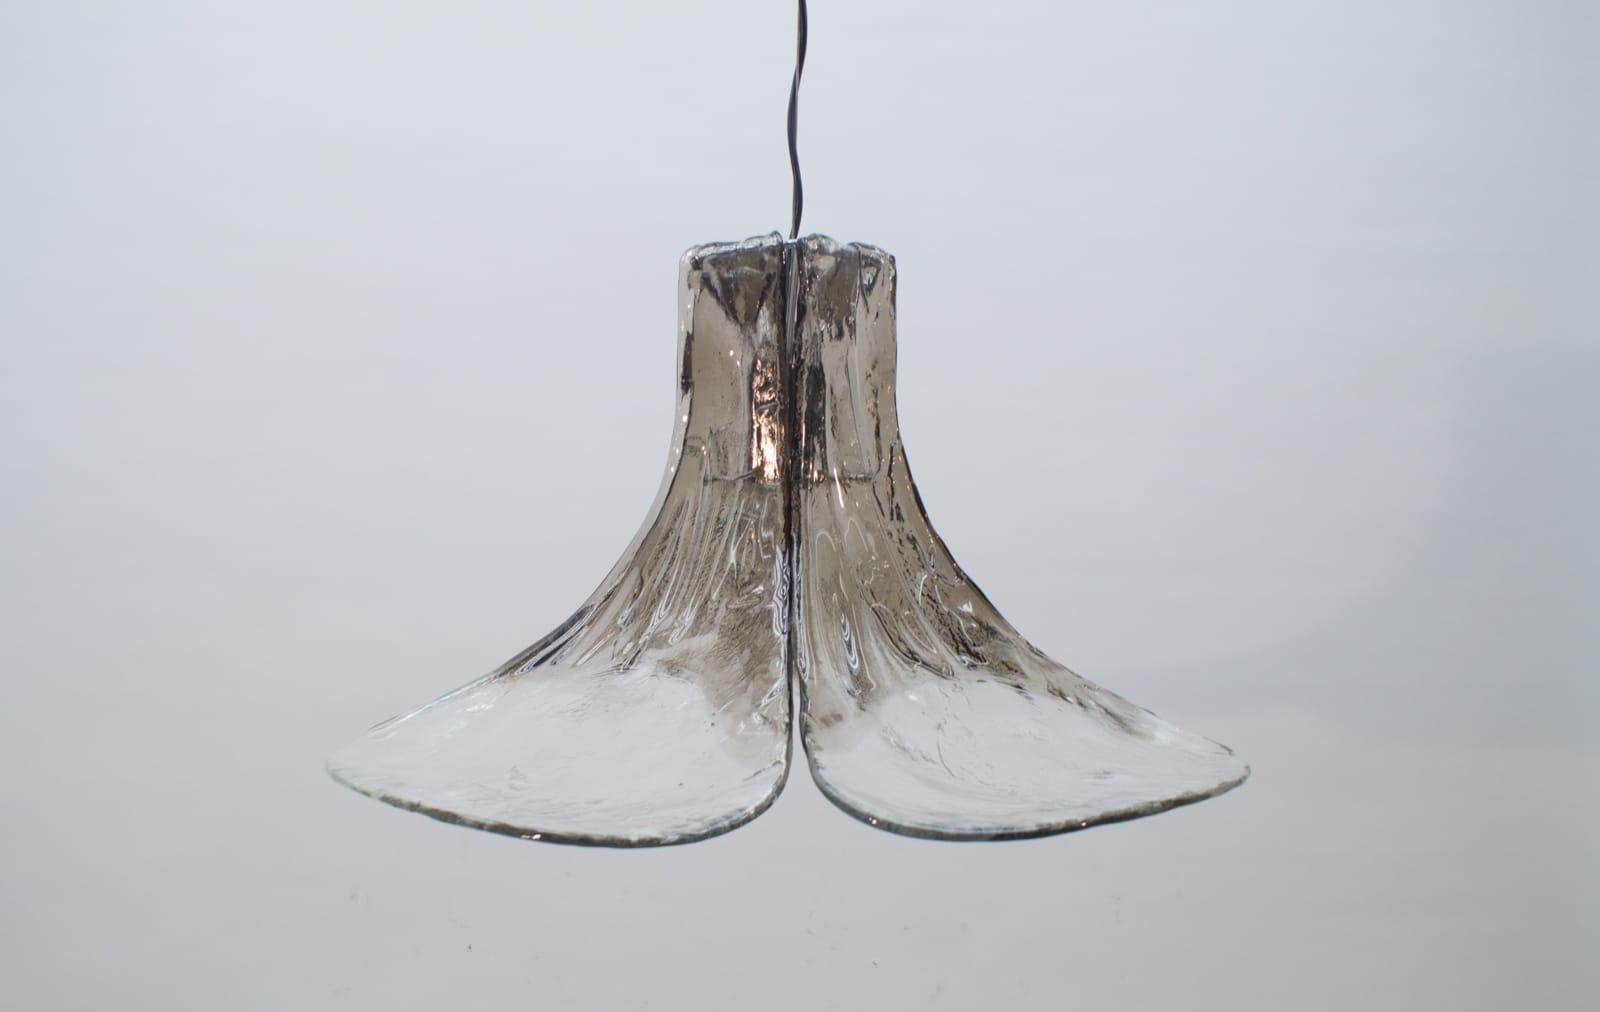 This set of pendant lamps was designed by Carlo Nason for Kalmar in the 1960s. It features Mazzega Murano glass leafs. 

The lamp is executed with 1x E27 Edison screw fit bulb. It is wired and in working condition. It runs both on 110 / 230